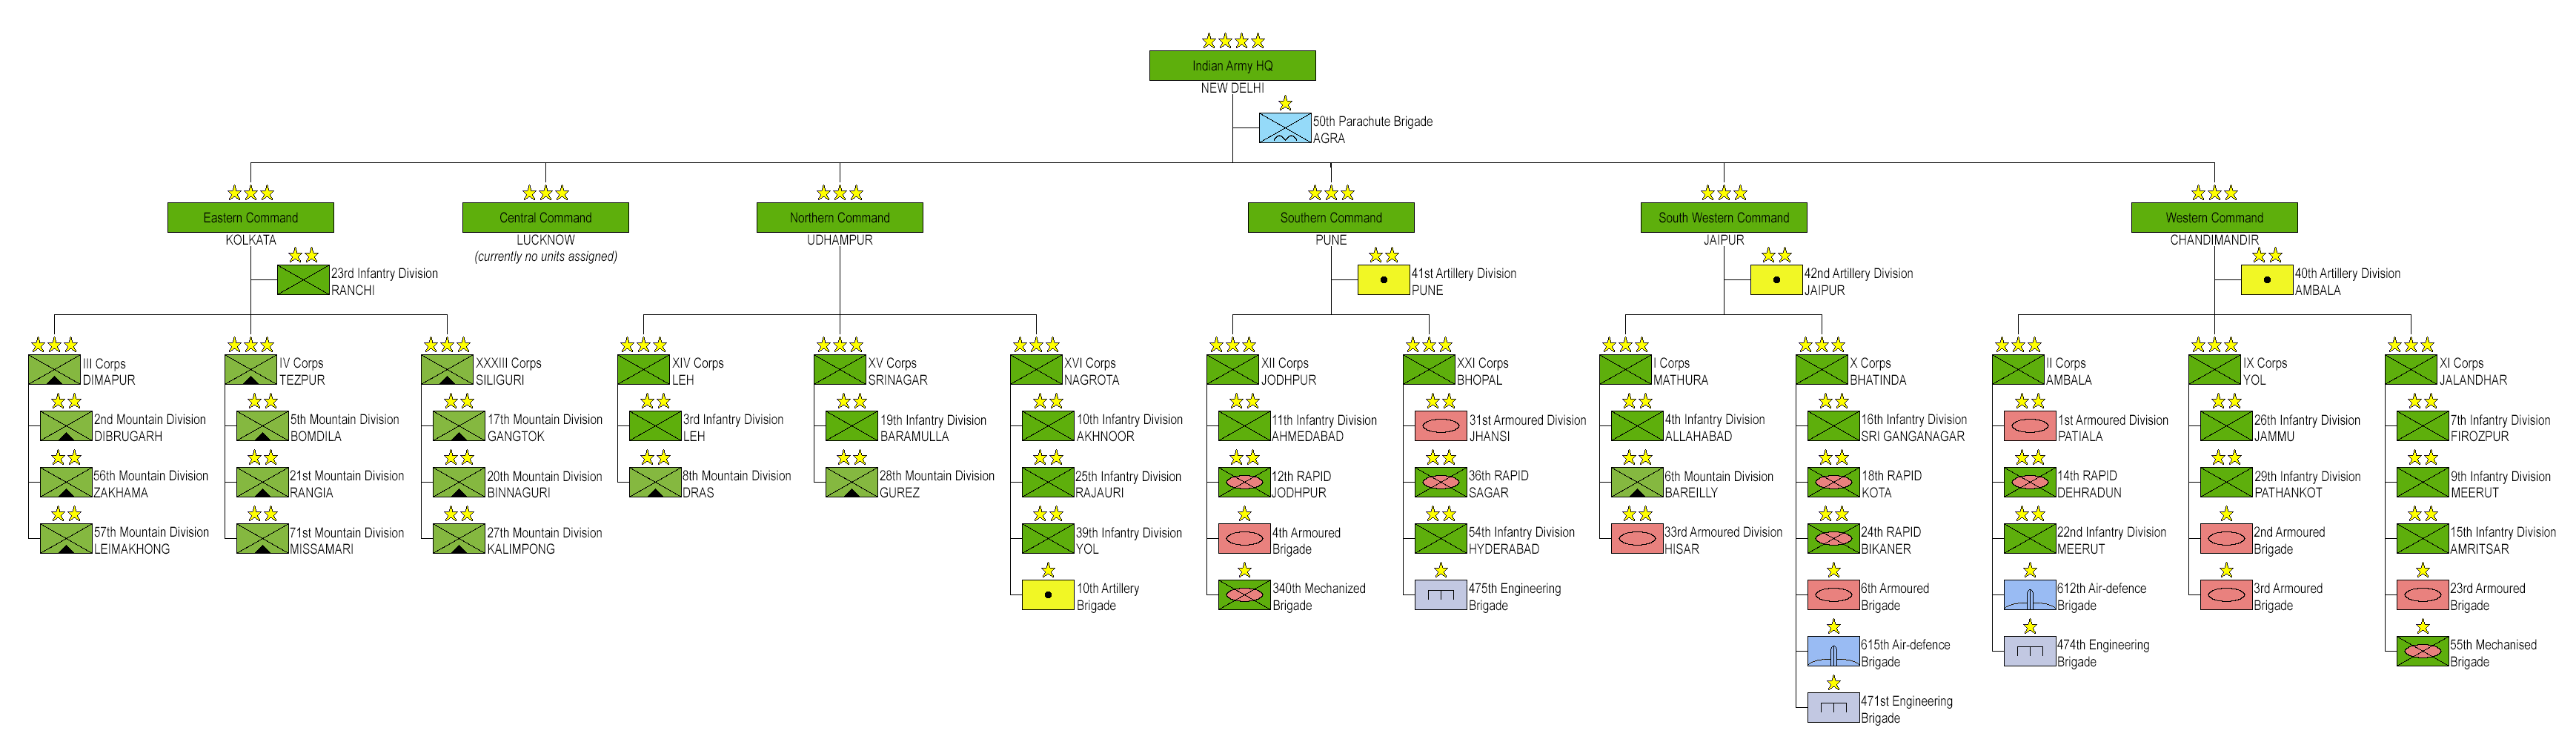 Basic Structure Of The Indian Army